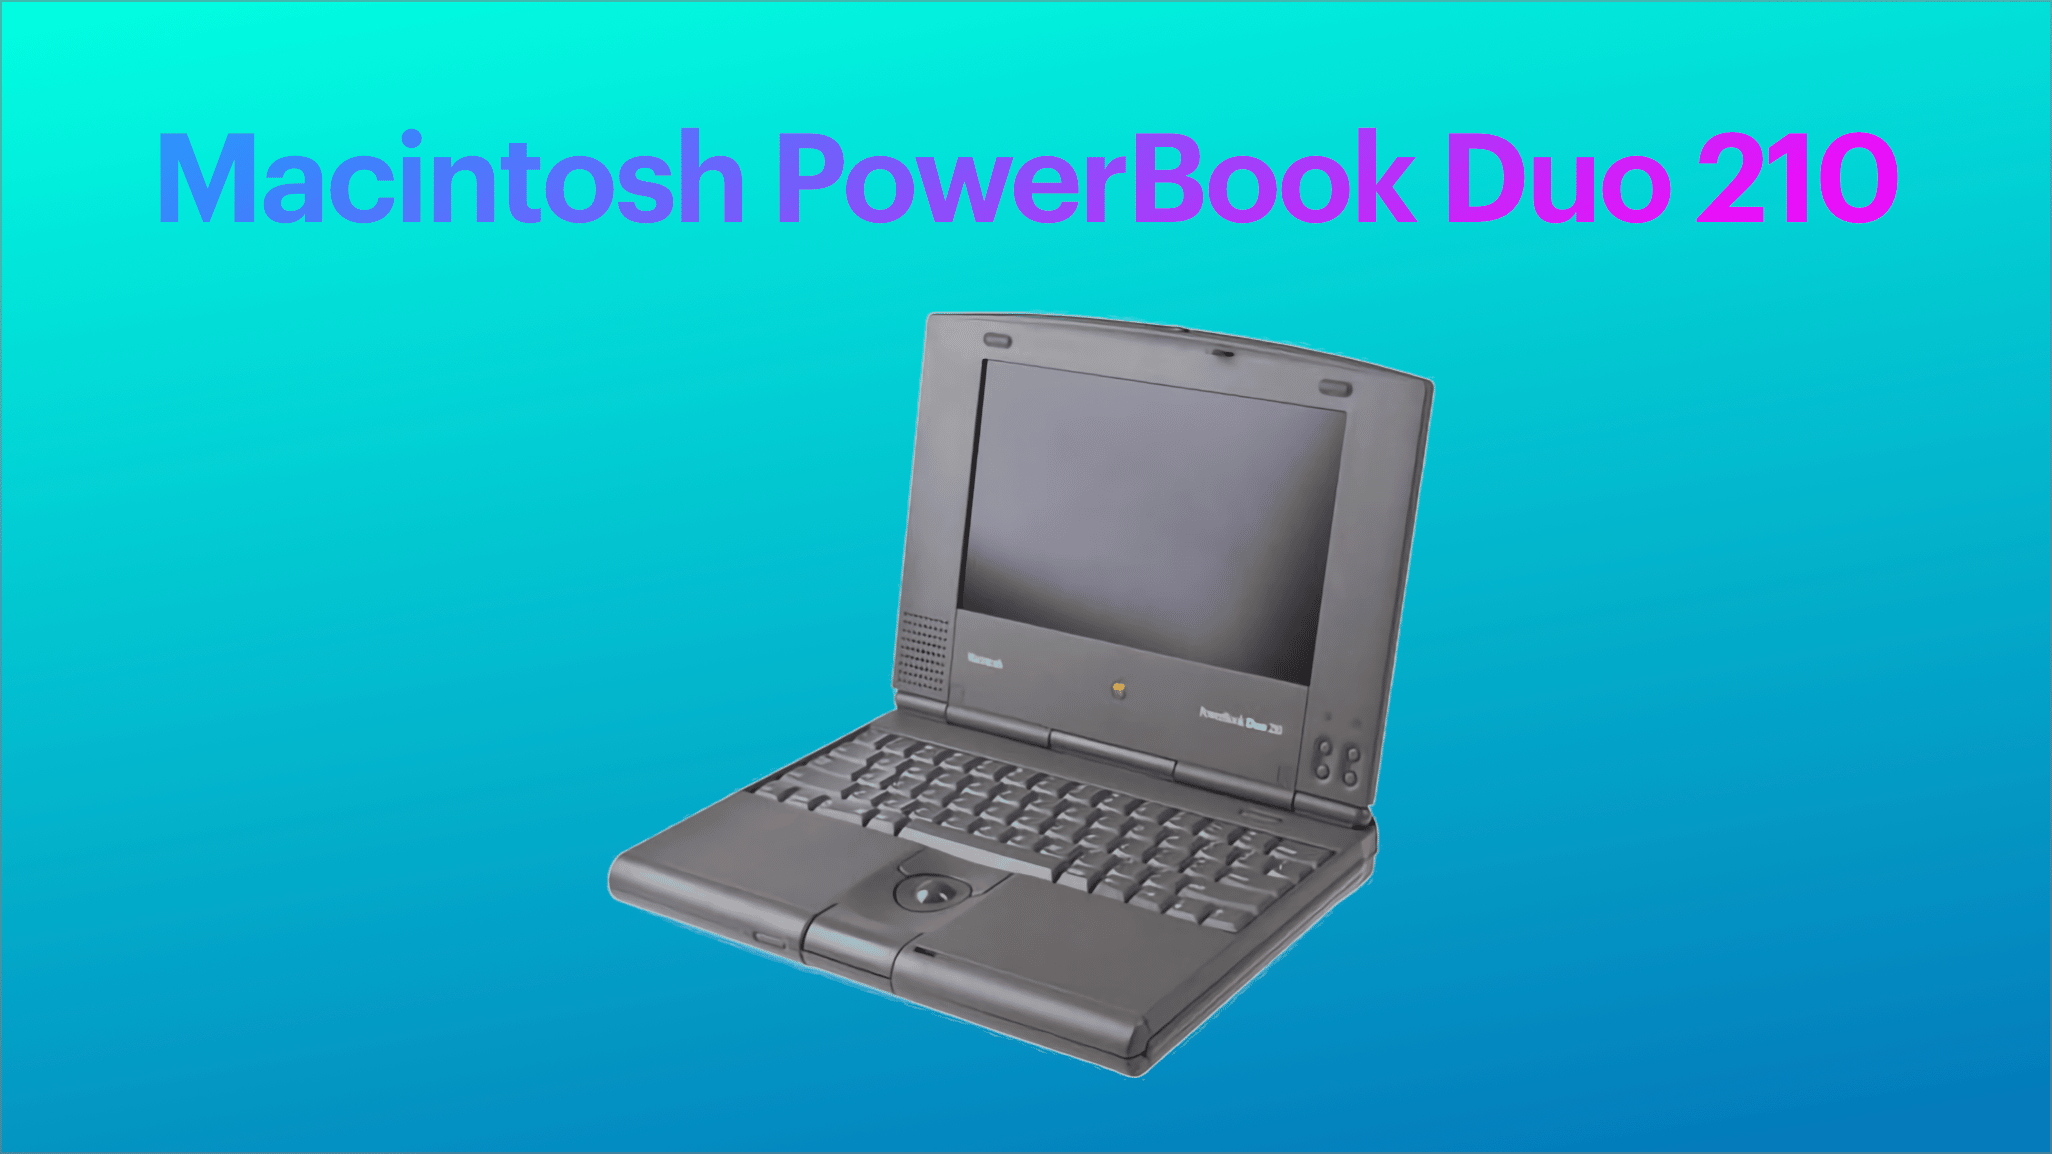 Remembering Owning The PowerBook Duo 210 — 1993-1994